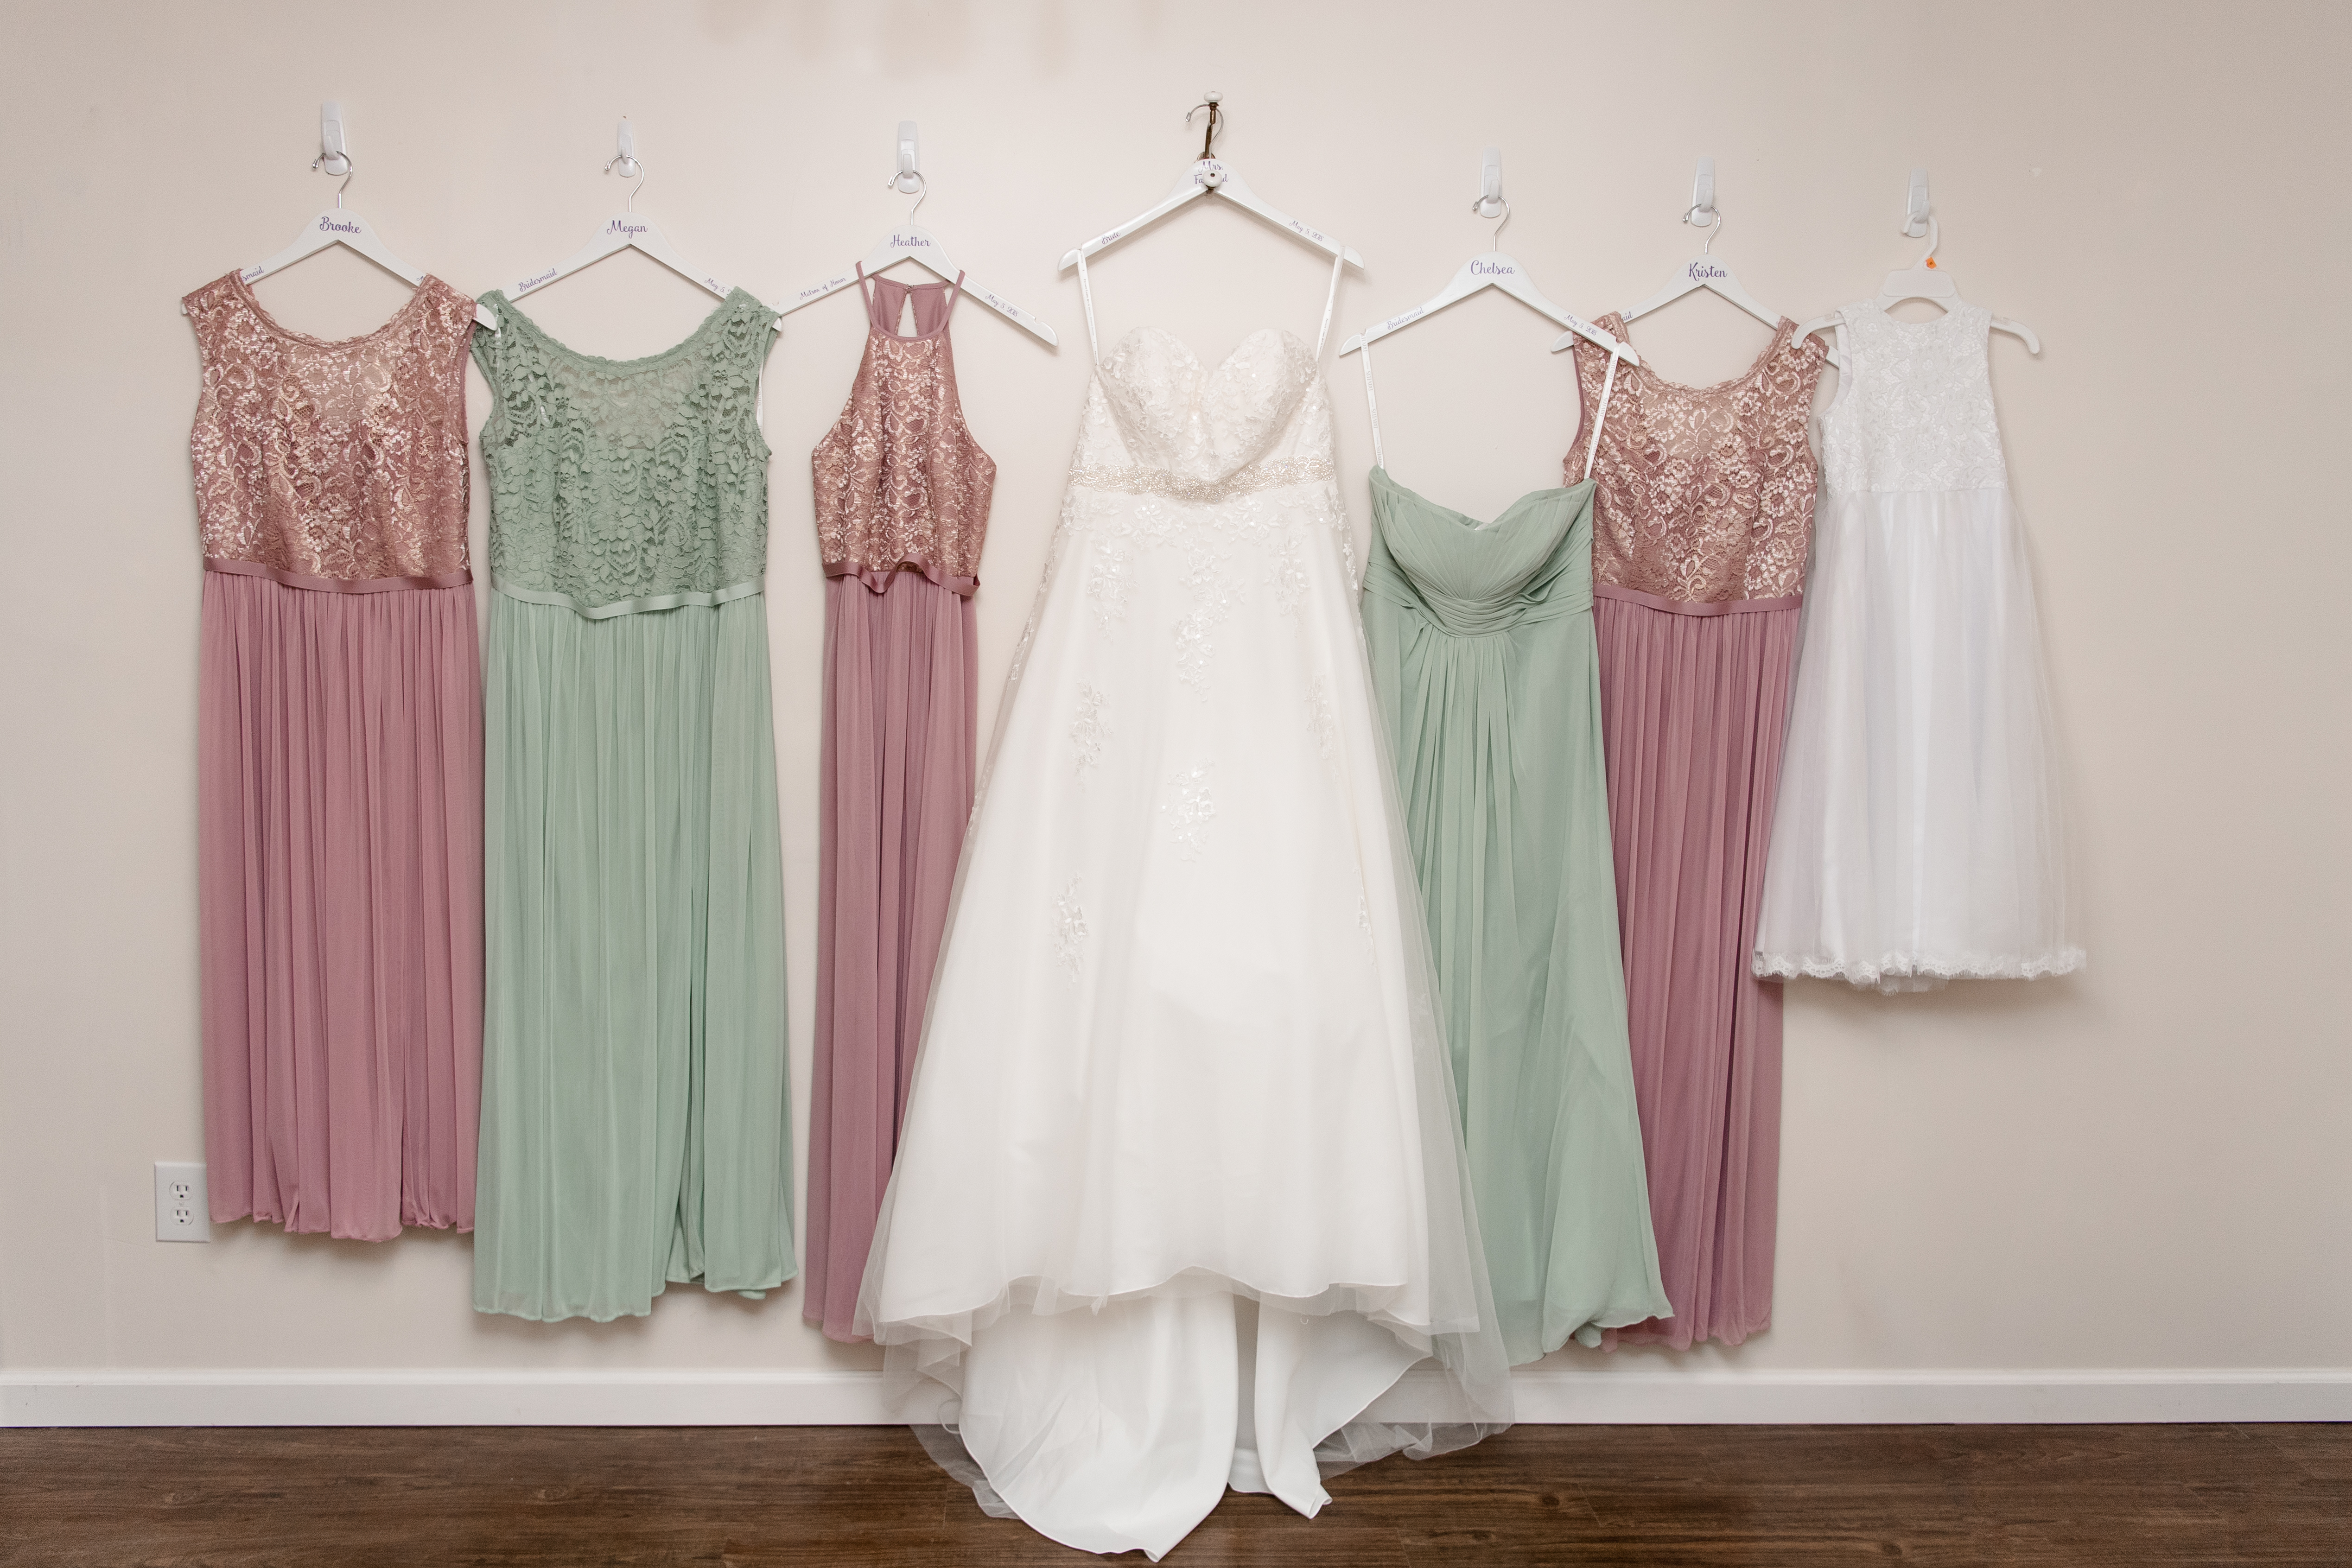 bridal gown and bridal party dresses hanging up